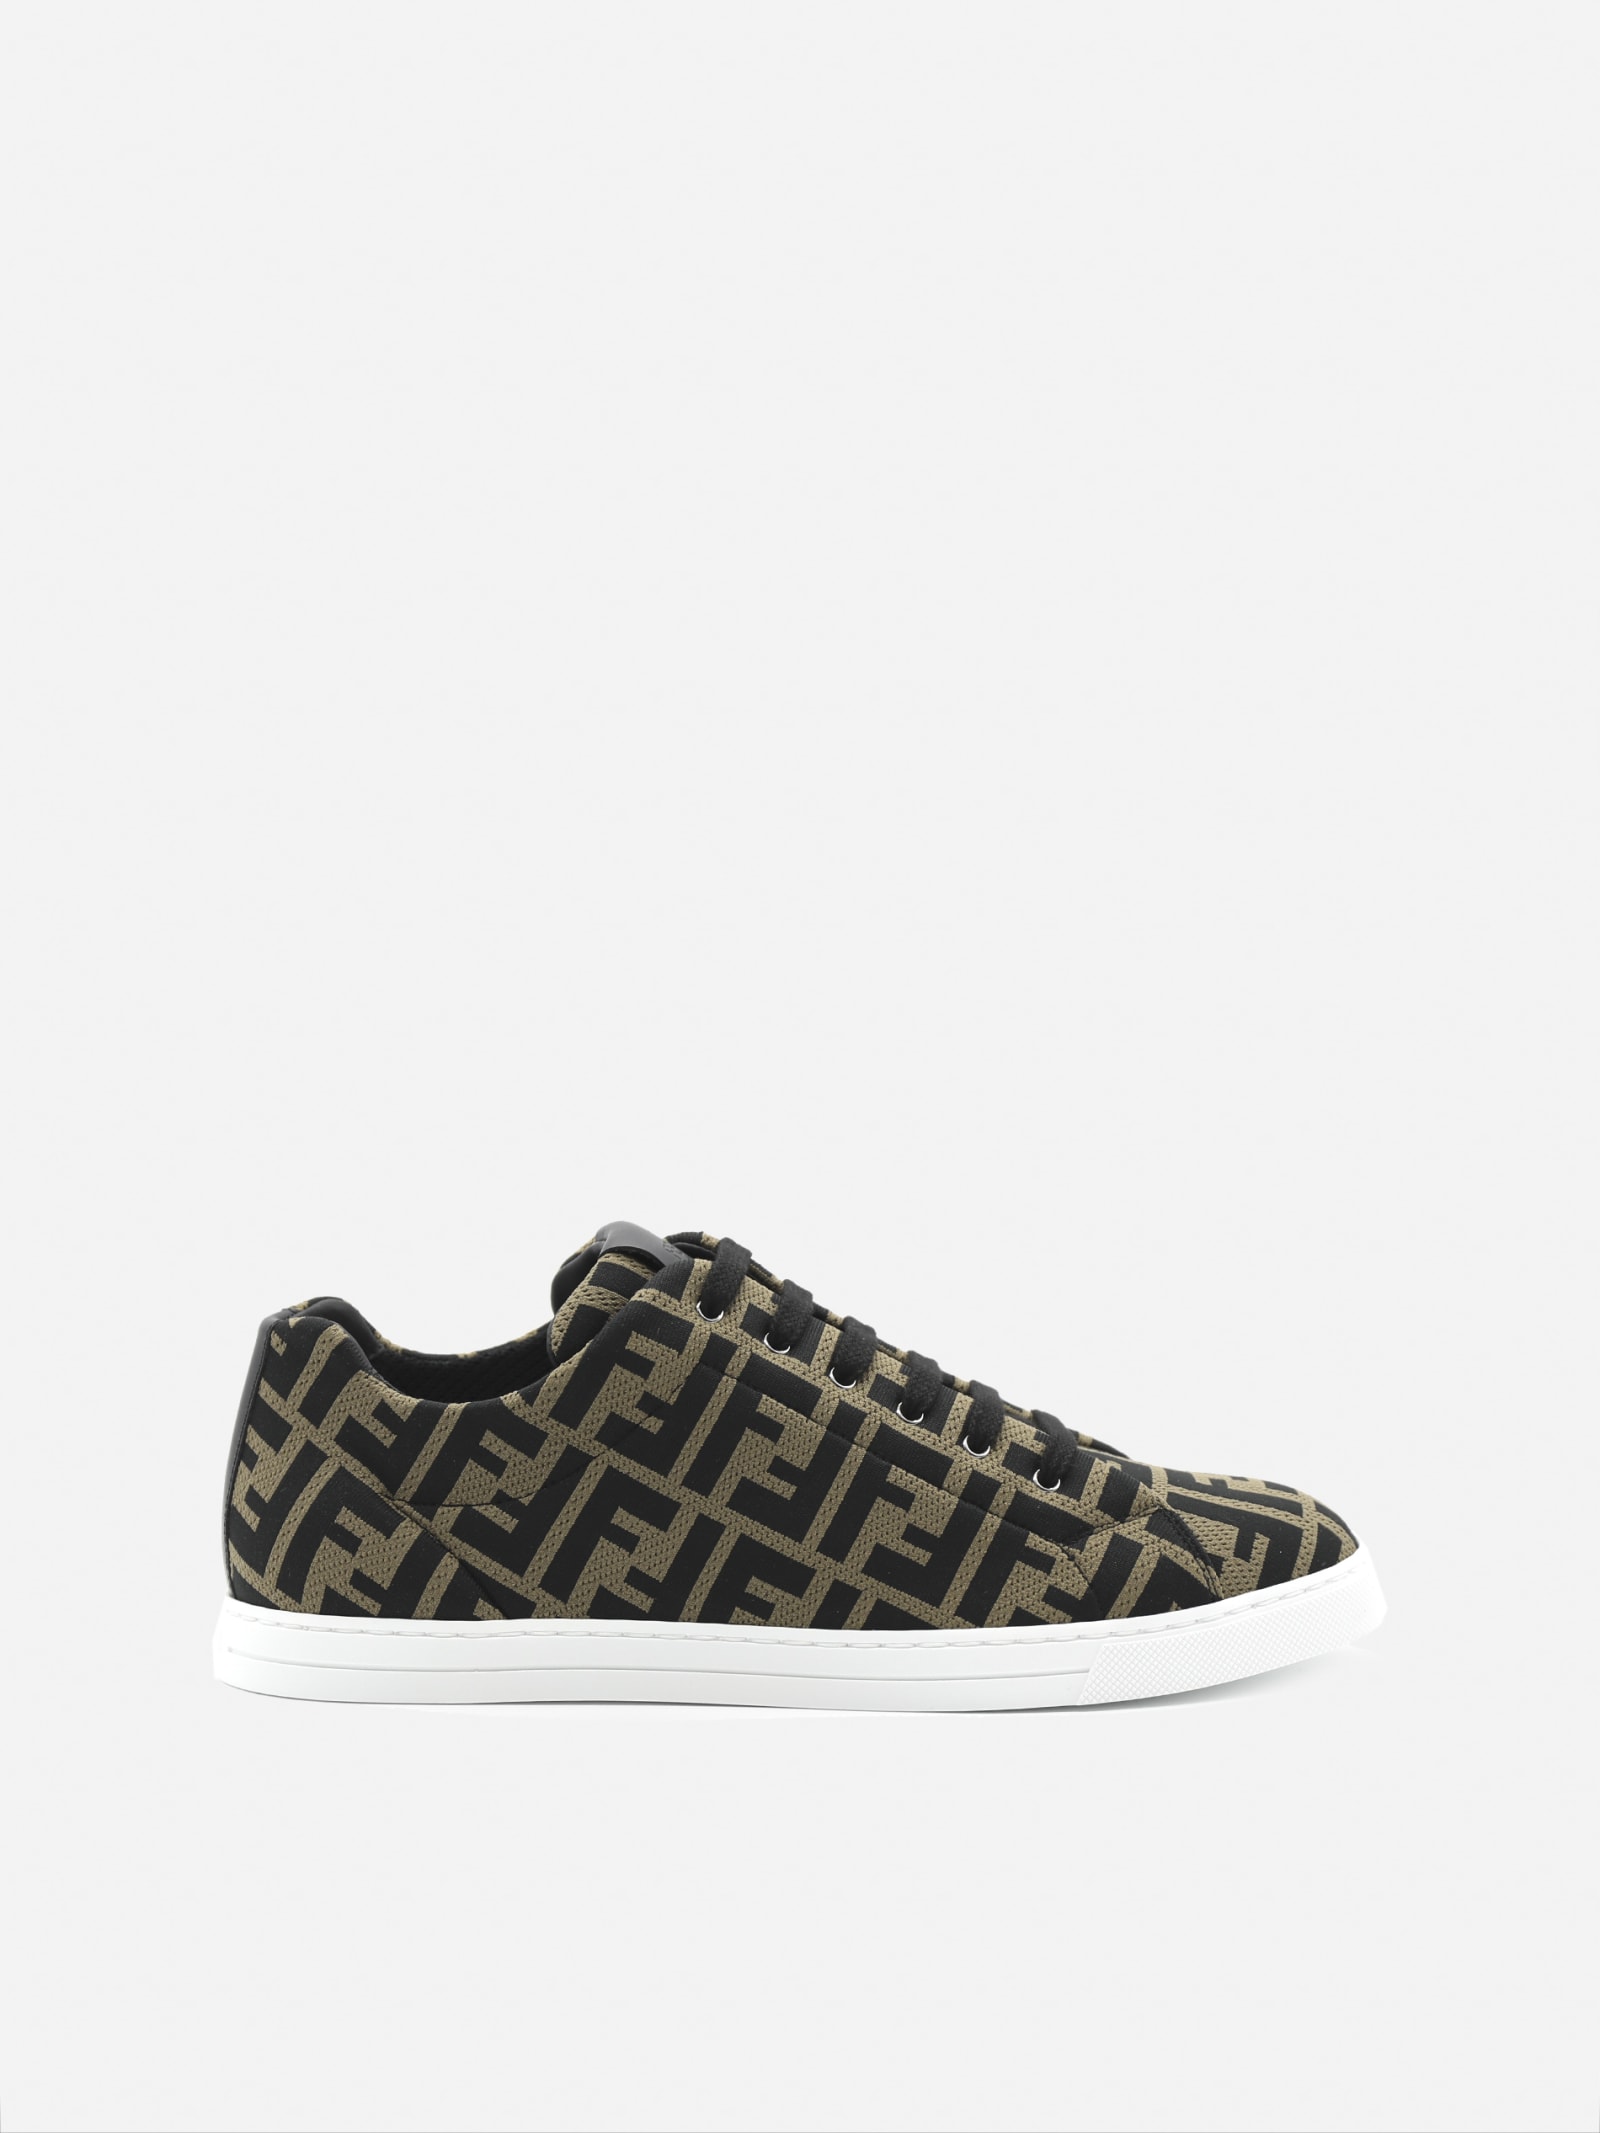 Fendi Low Top Sneakers In Technical Fabric With All-over Ff Motif